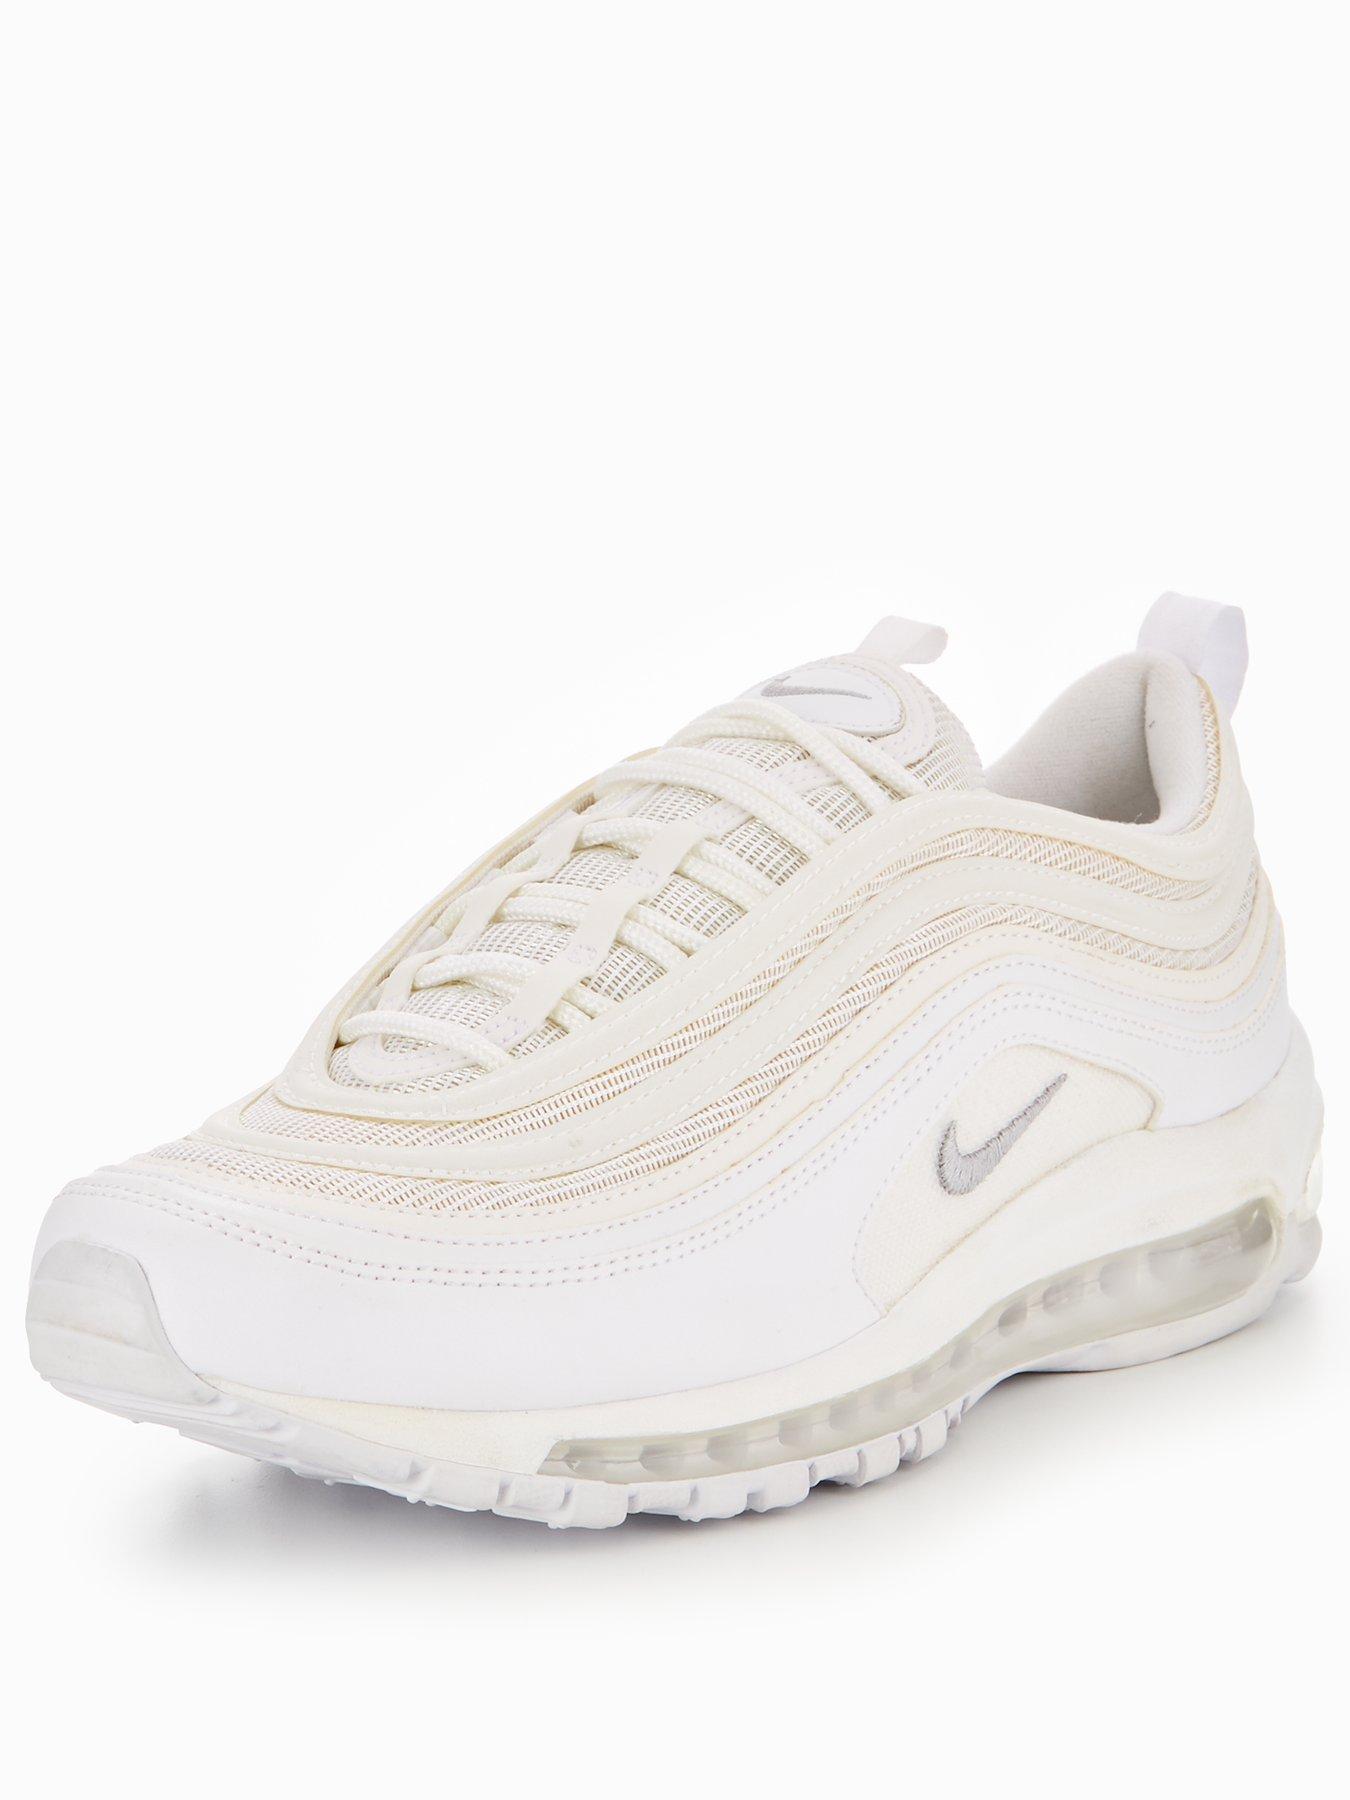 Nike Air Max 97 - White | littlewoods.com